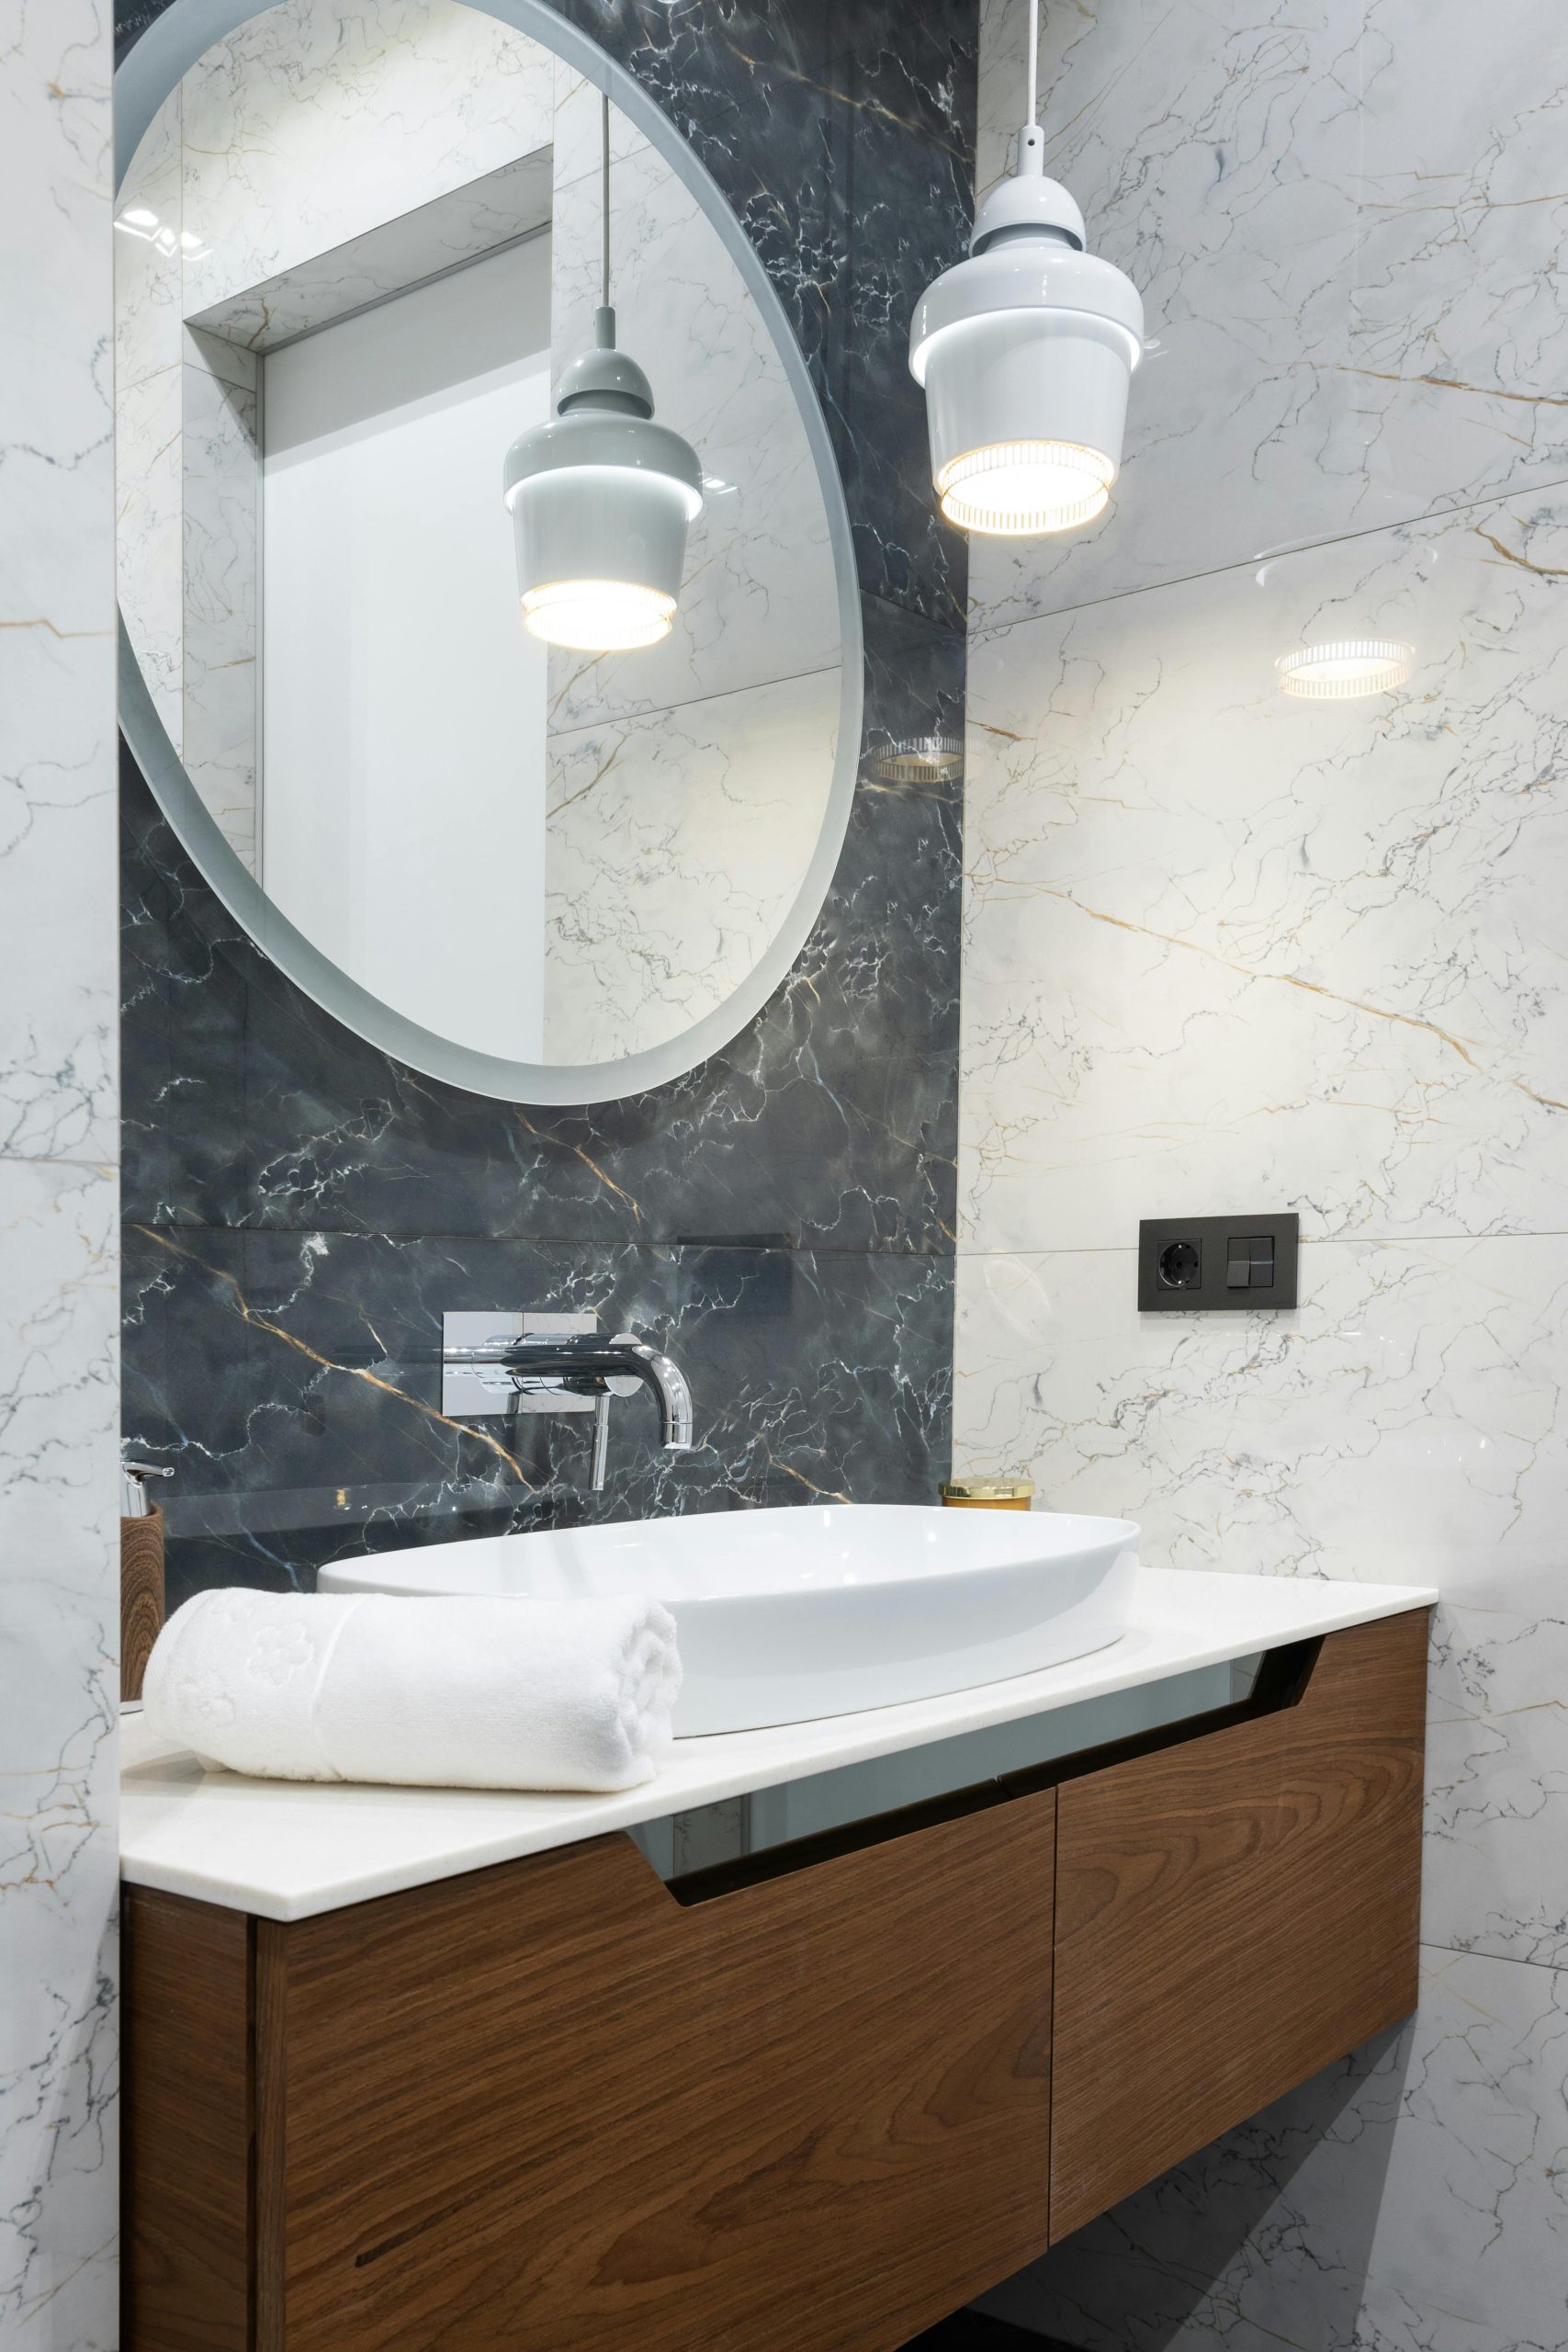 Choosing the Right Materials for Your Bathroom Sink